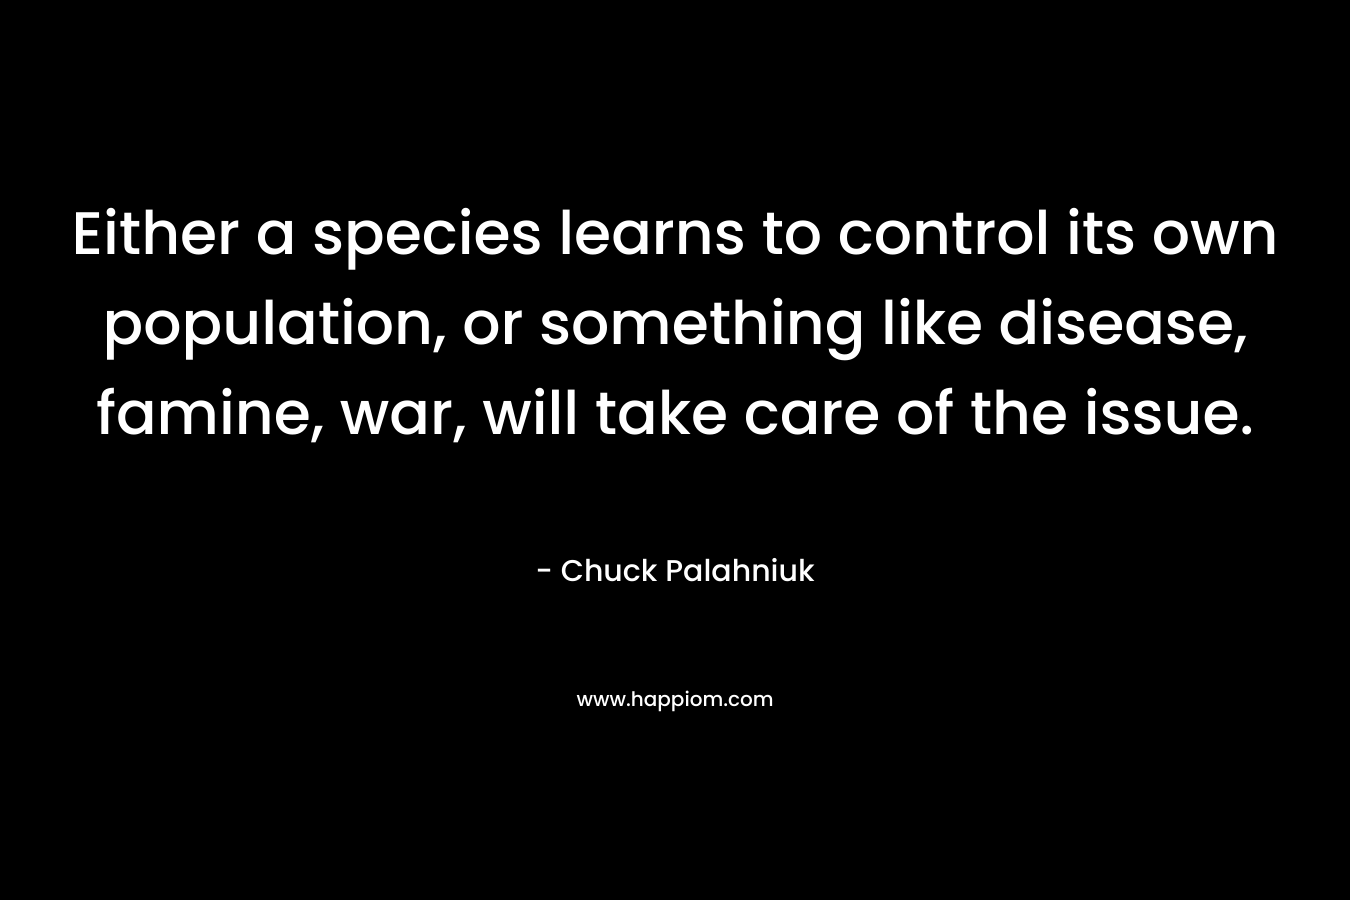 Either a species learns to control its own population, or something like disease, famine, war, will take care of the issue.